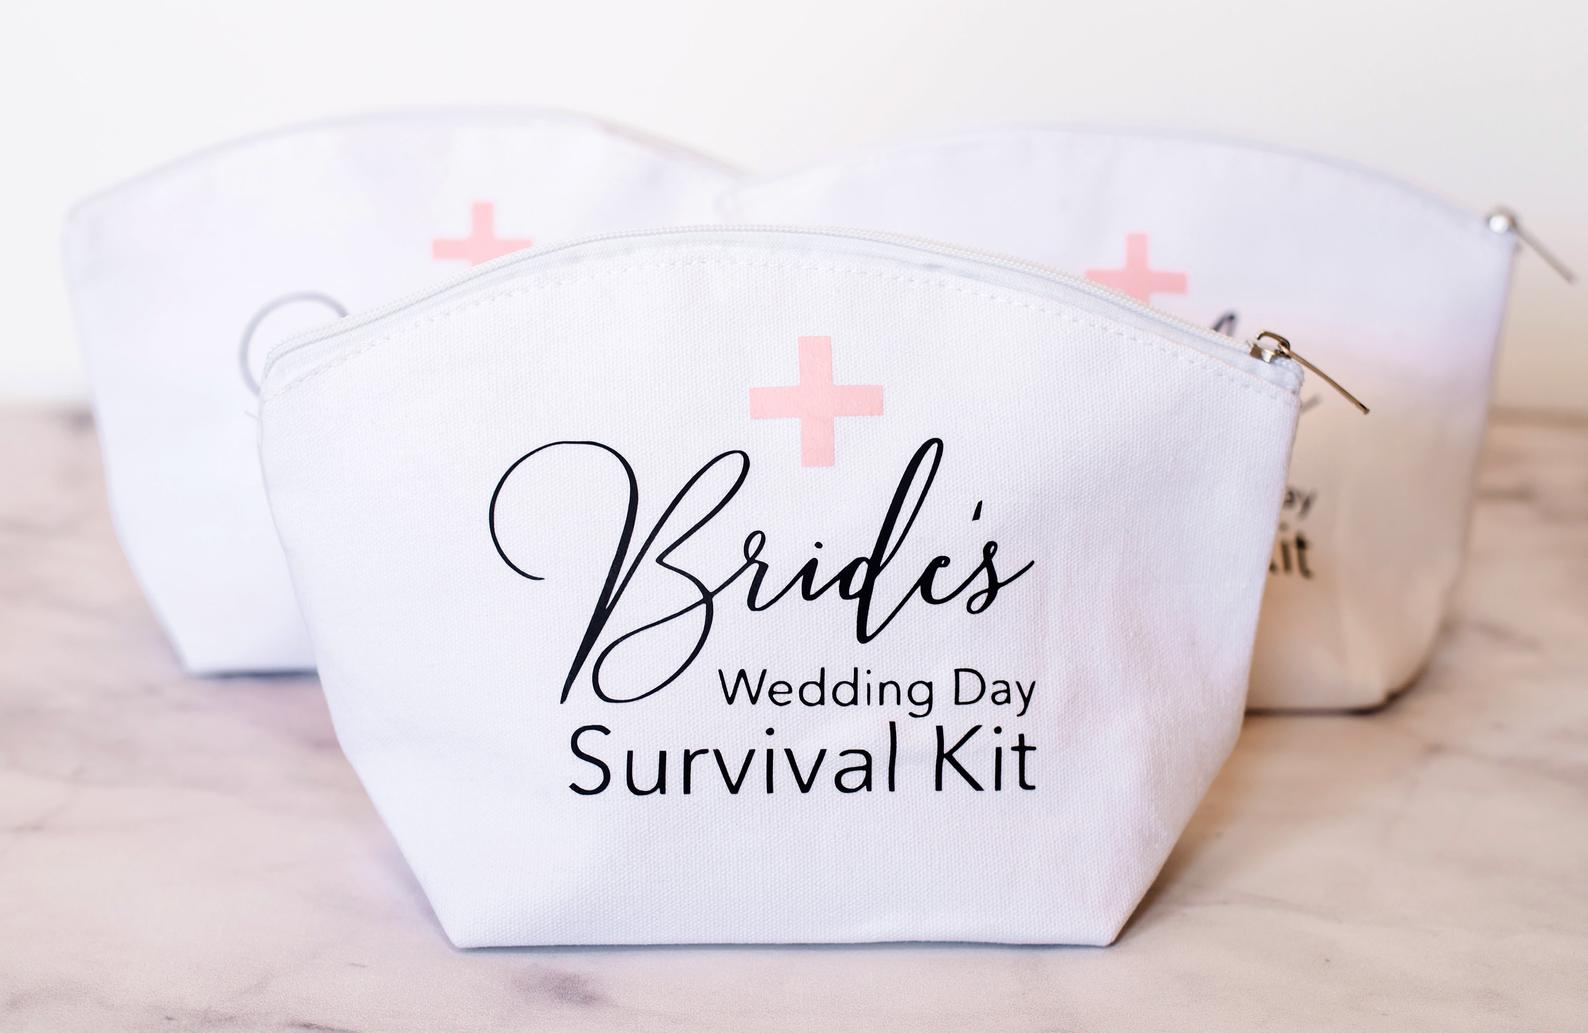 Building the Perfect Wedding Day Emergency Kit The Historic Alfred